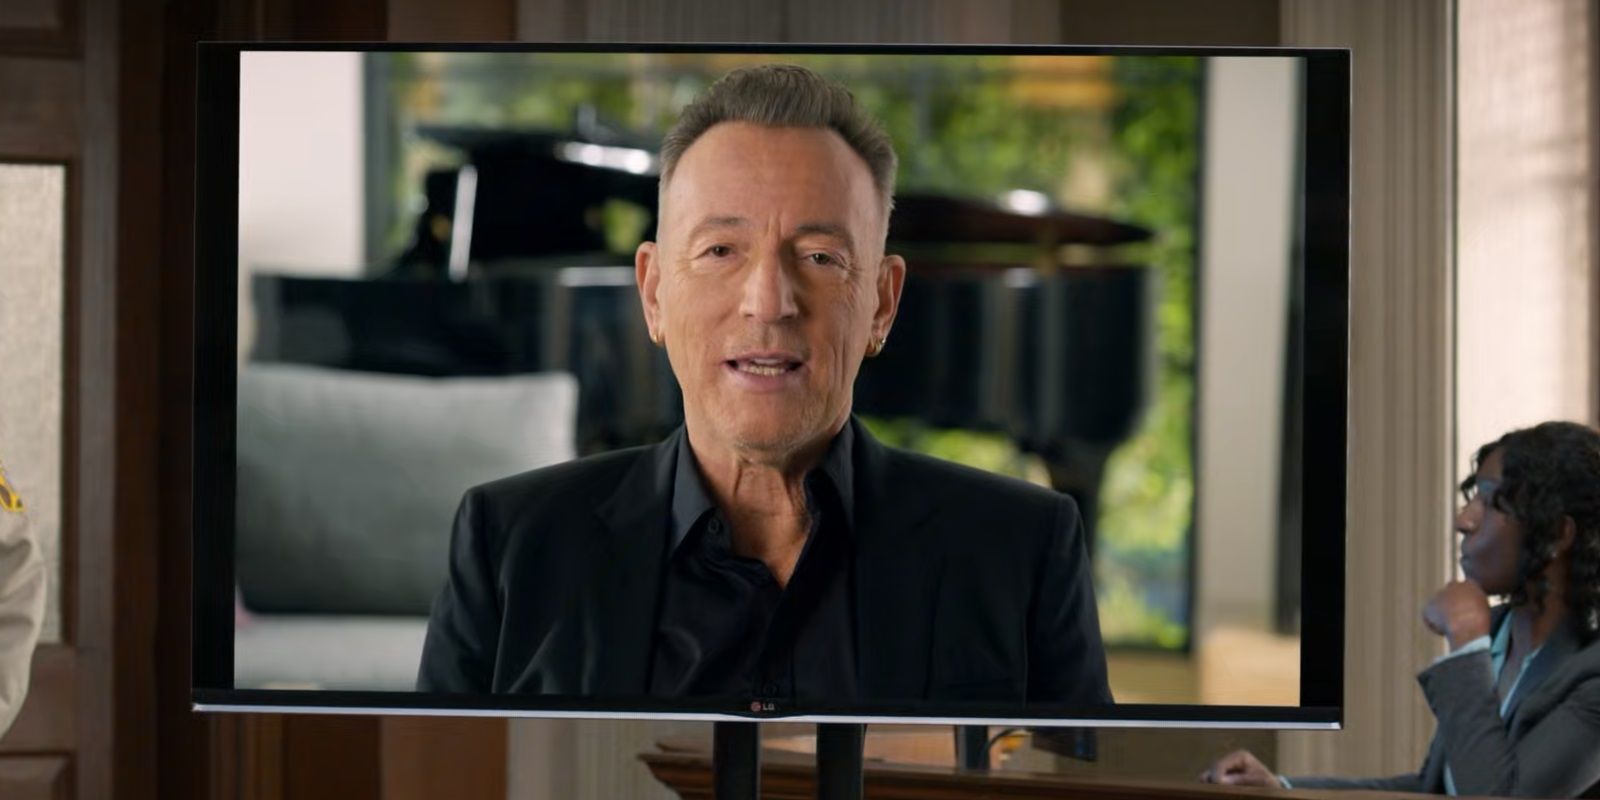 Bruce Springsteen on a TV screen in Curb Your Enthusiasm